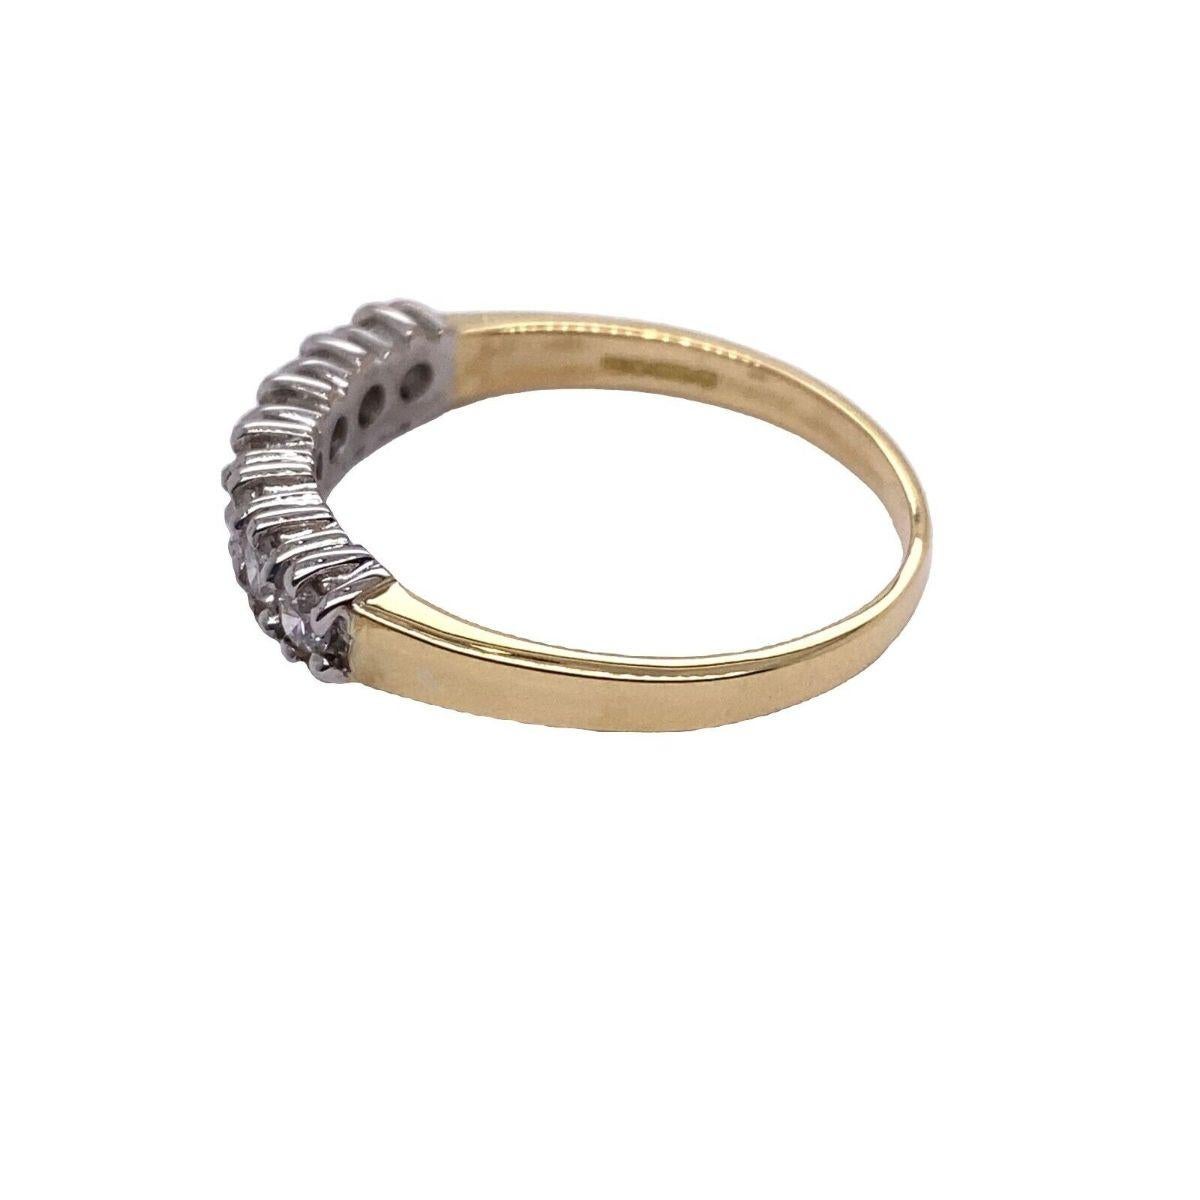 Classic 7-Stone Natural Diamond Set Ring, In 18ct Yellow &White Gold

This diamond ring is gorgeous and can be worn as an half eternity ring. It features a row of 7 stones, 0.50ct of diamonds set into a 18ct yellow and white gold shank. The diamonds